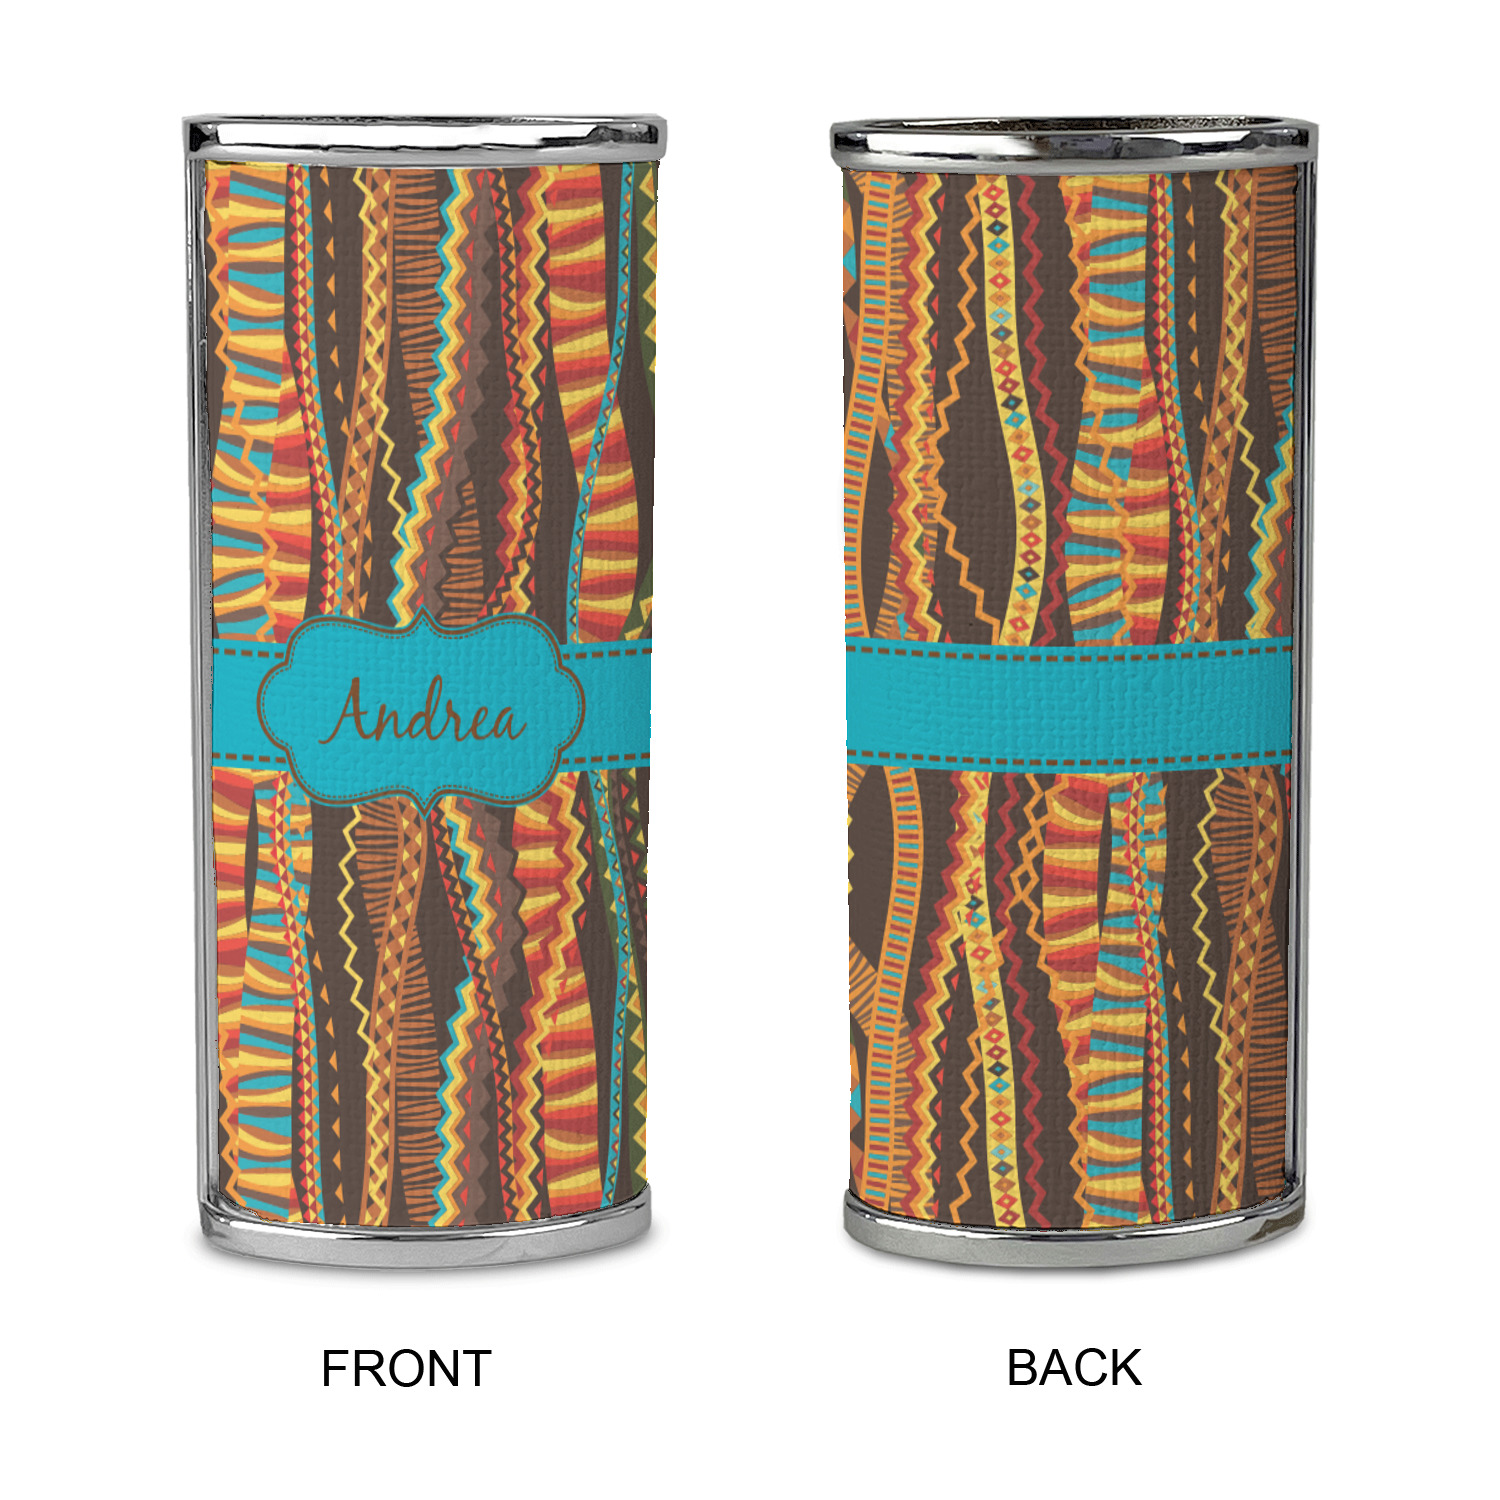 Custom Tribal Ribbons Case for BIC Lighters (Personalized)